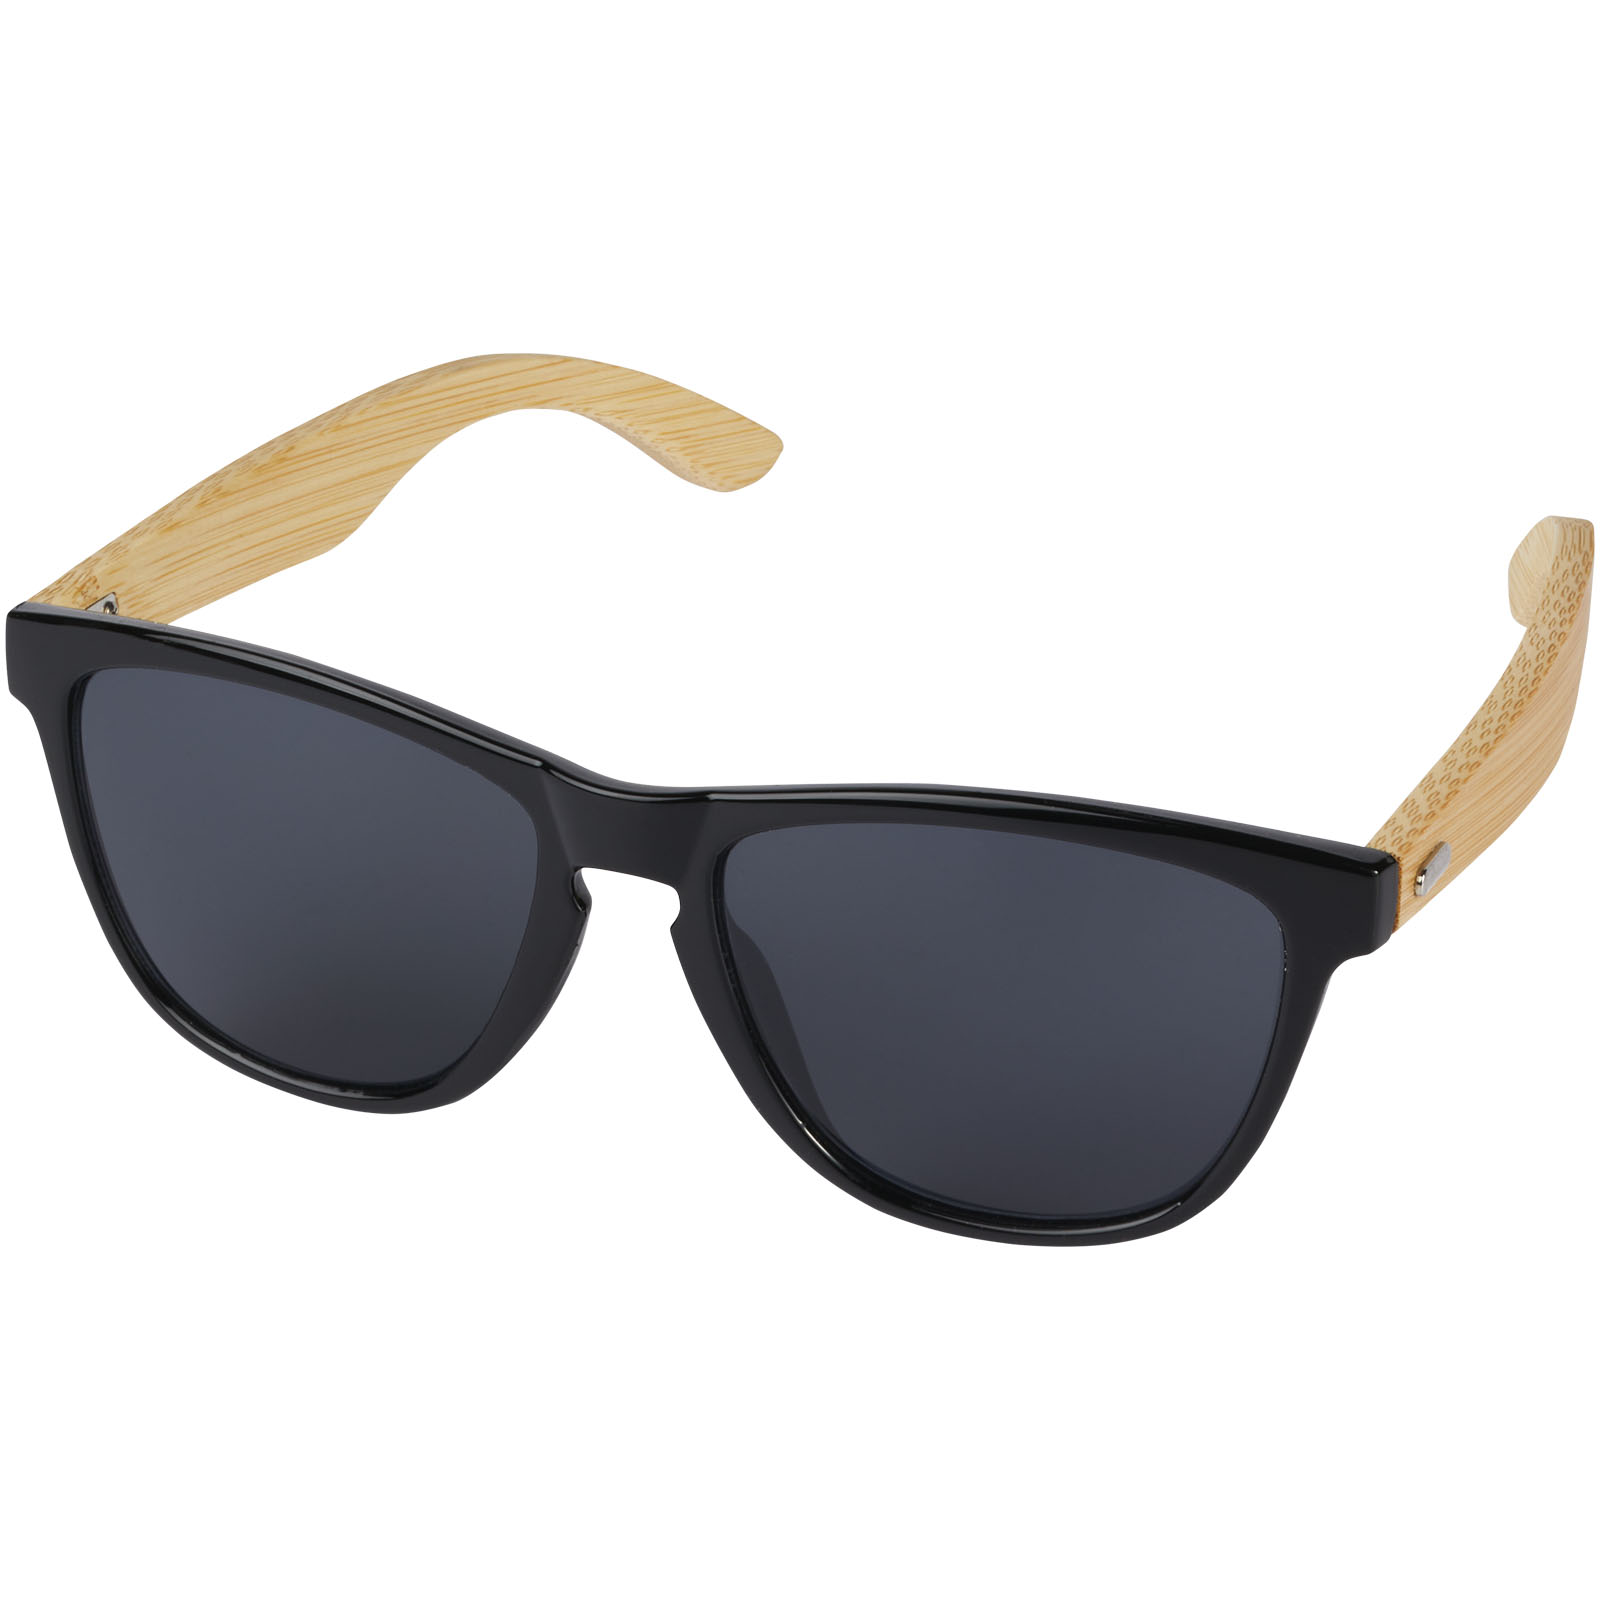 Sports & Leisure - Sun Ray ocean bound plastic and bamboo sunglasses